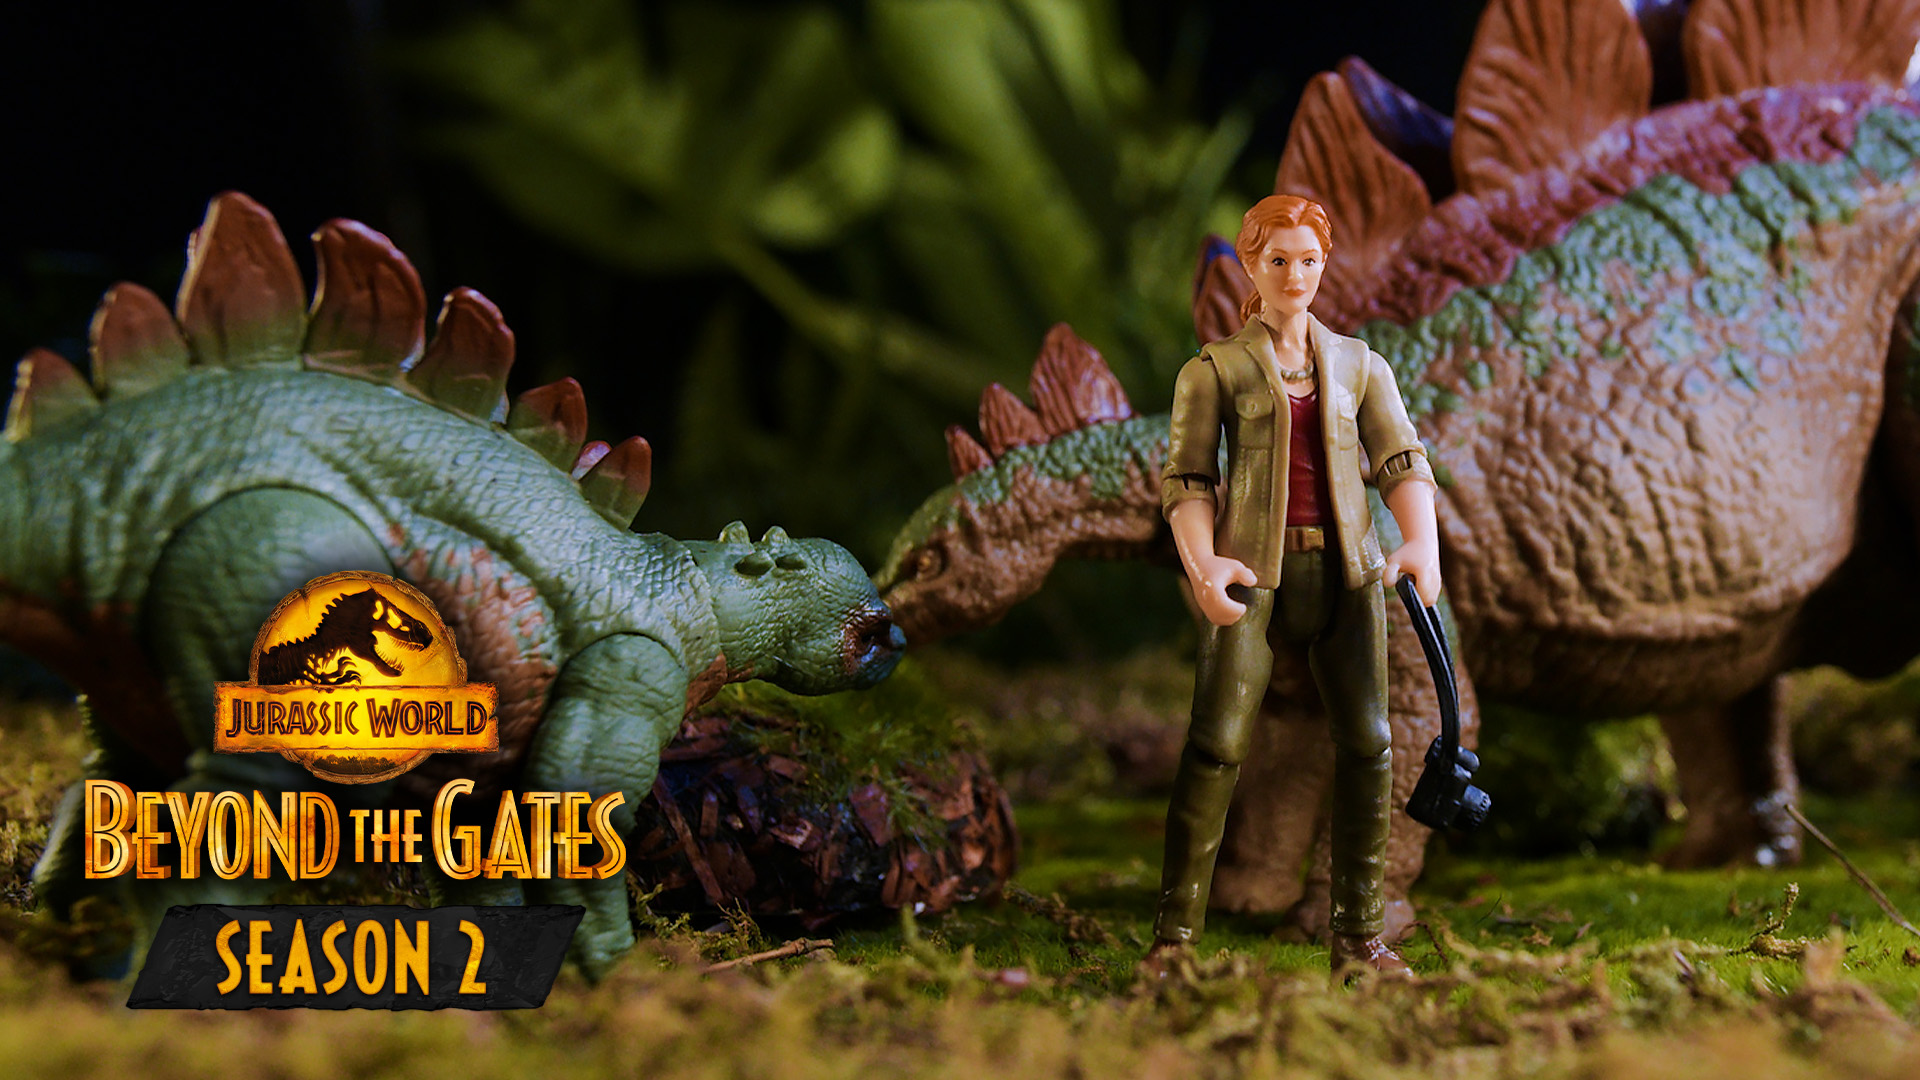 Dr. Sarah Harding and the Baby Stegosaurus Join the Legacy Collection in New Beyond The Gates!